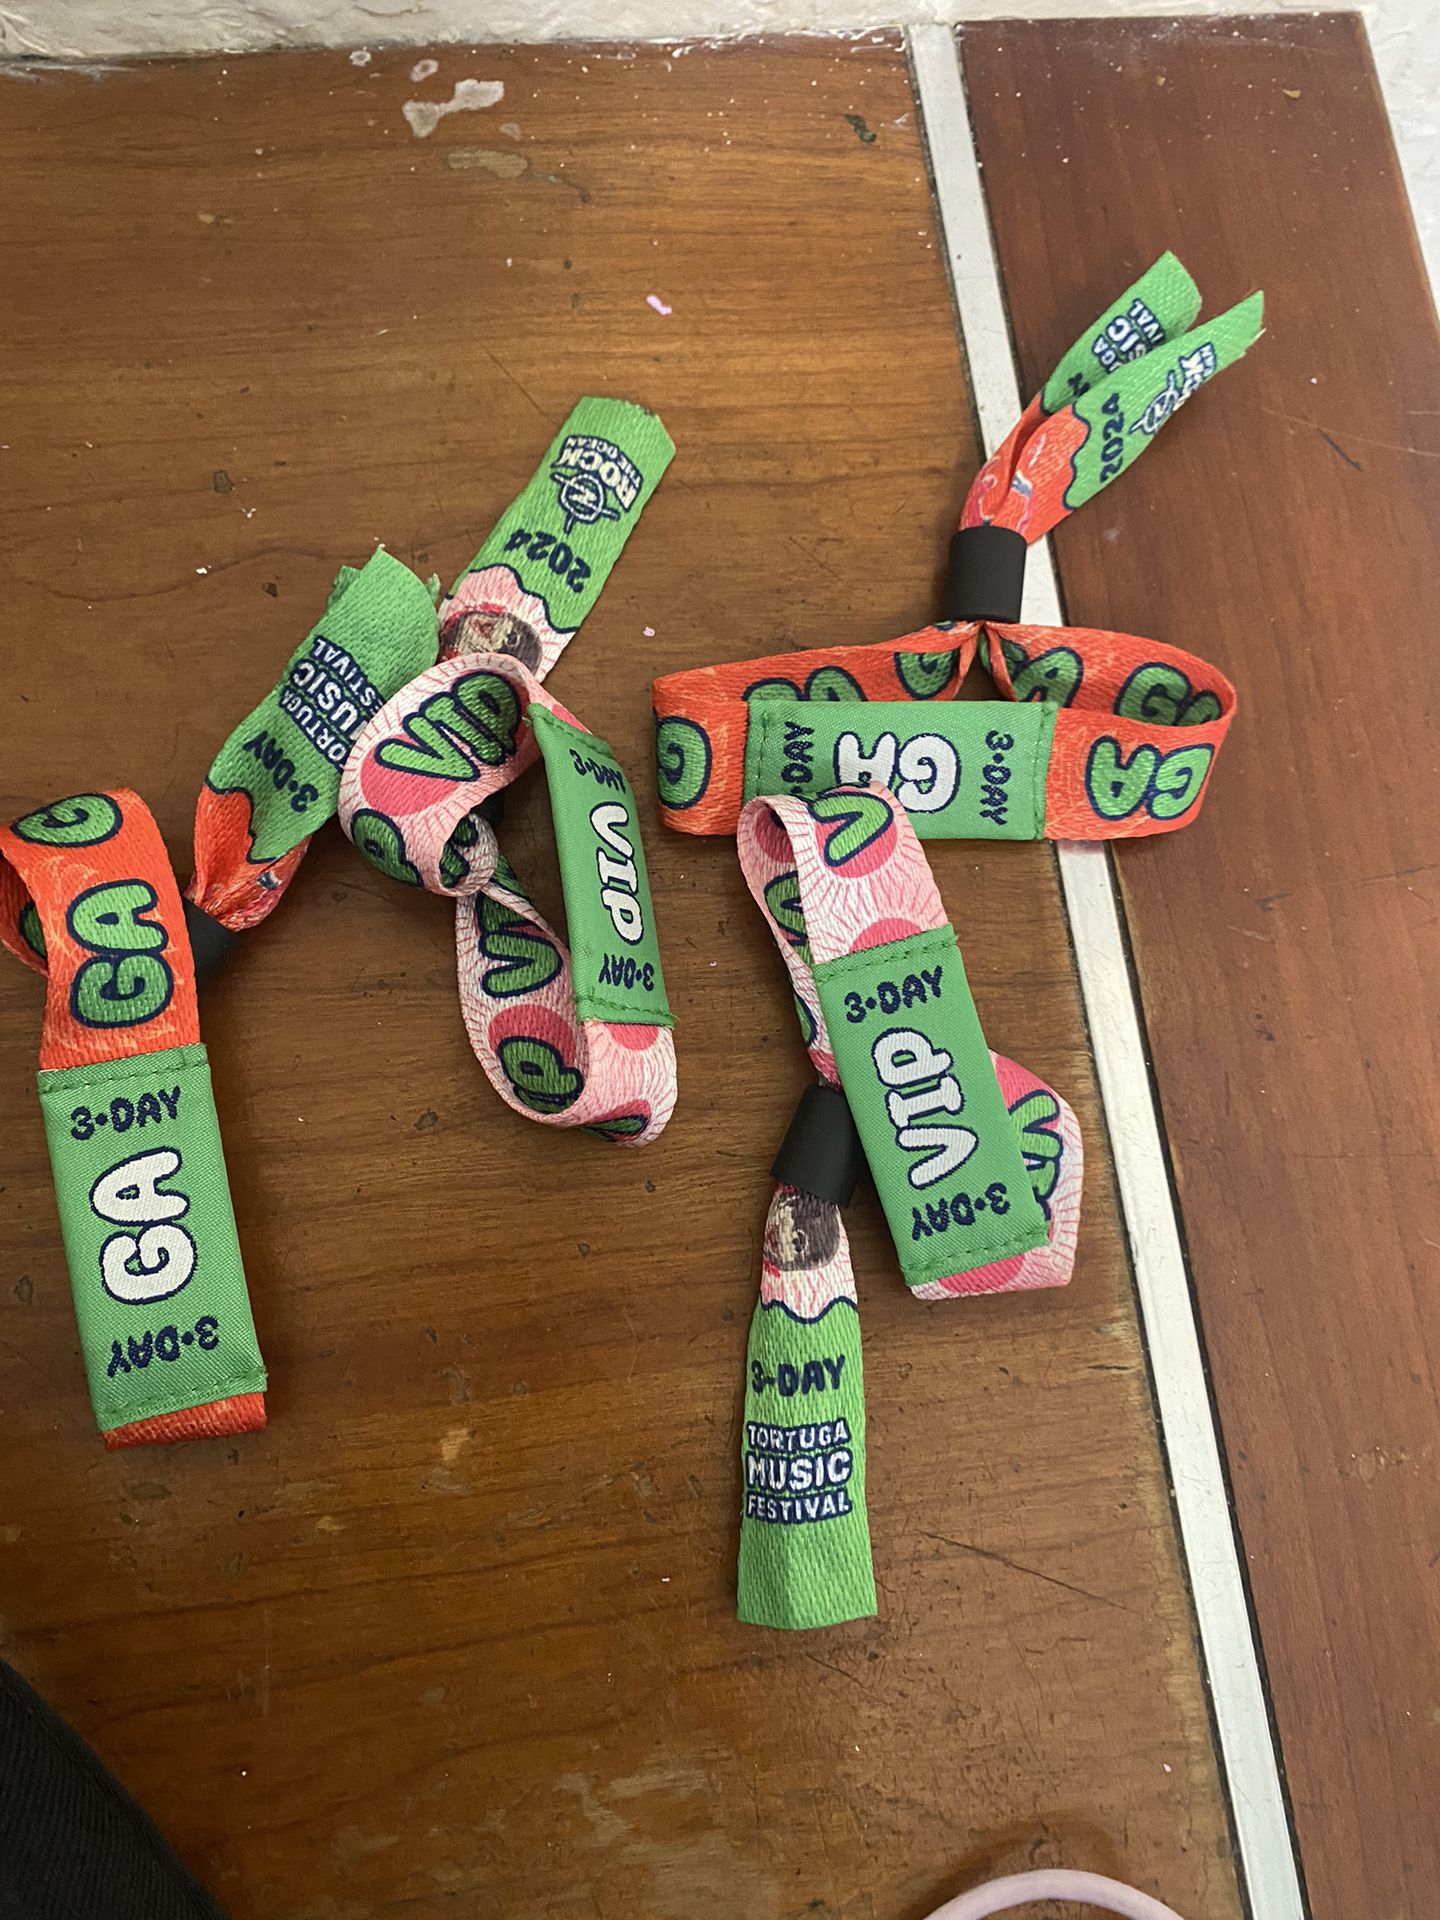 TorTuga wristbands For Sale